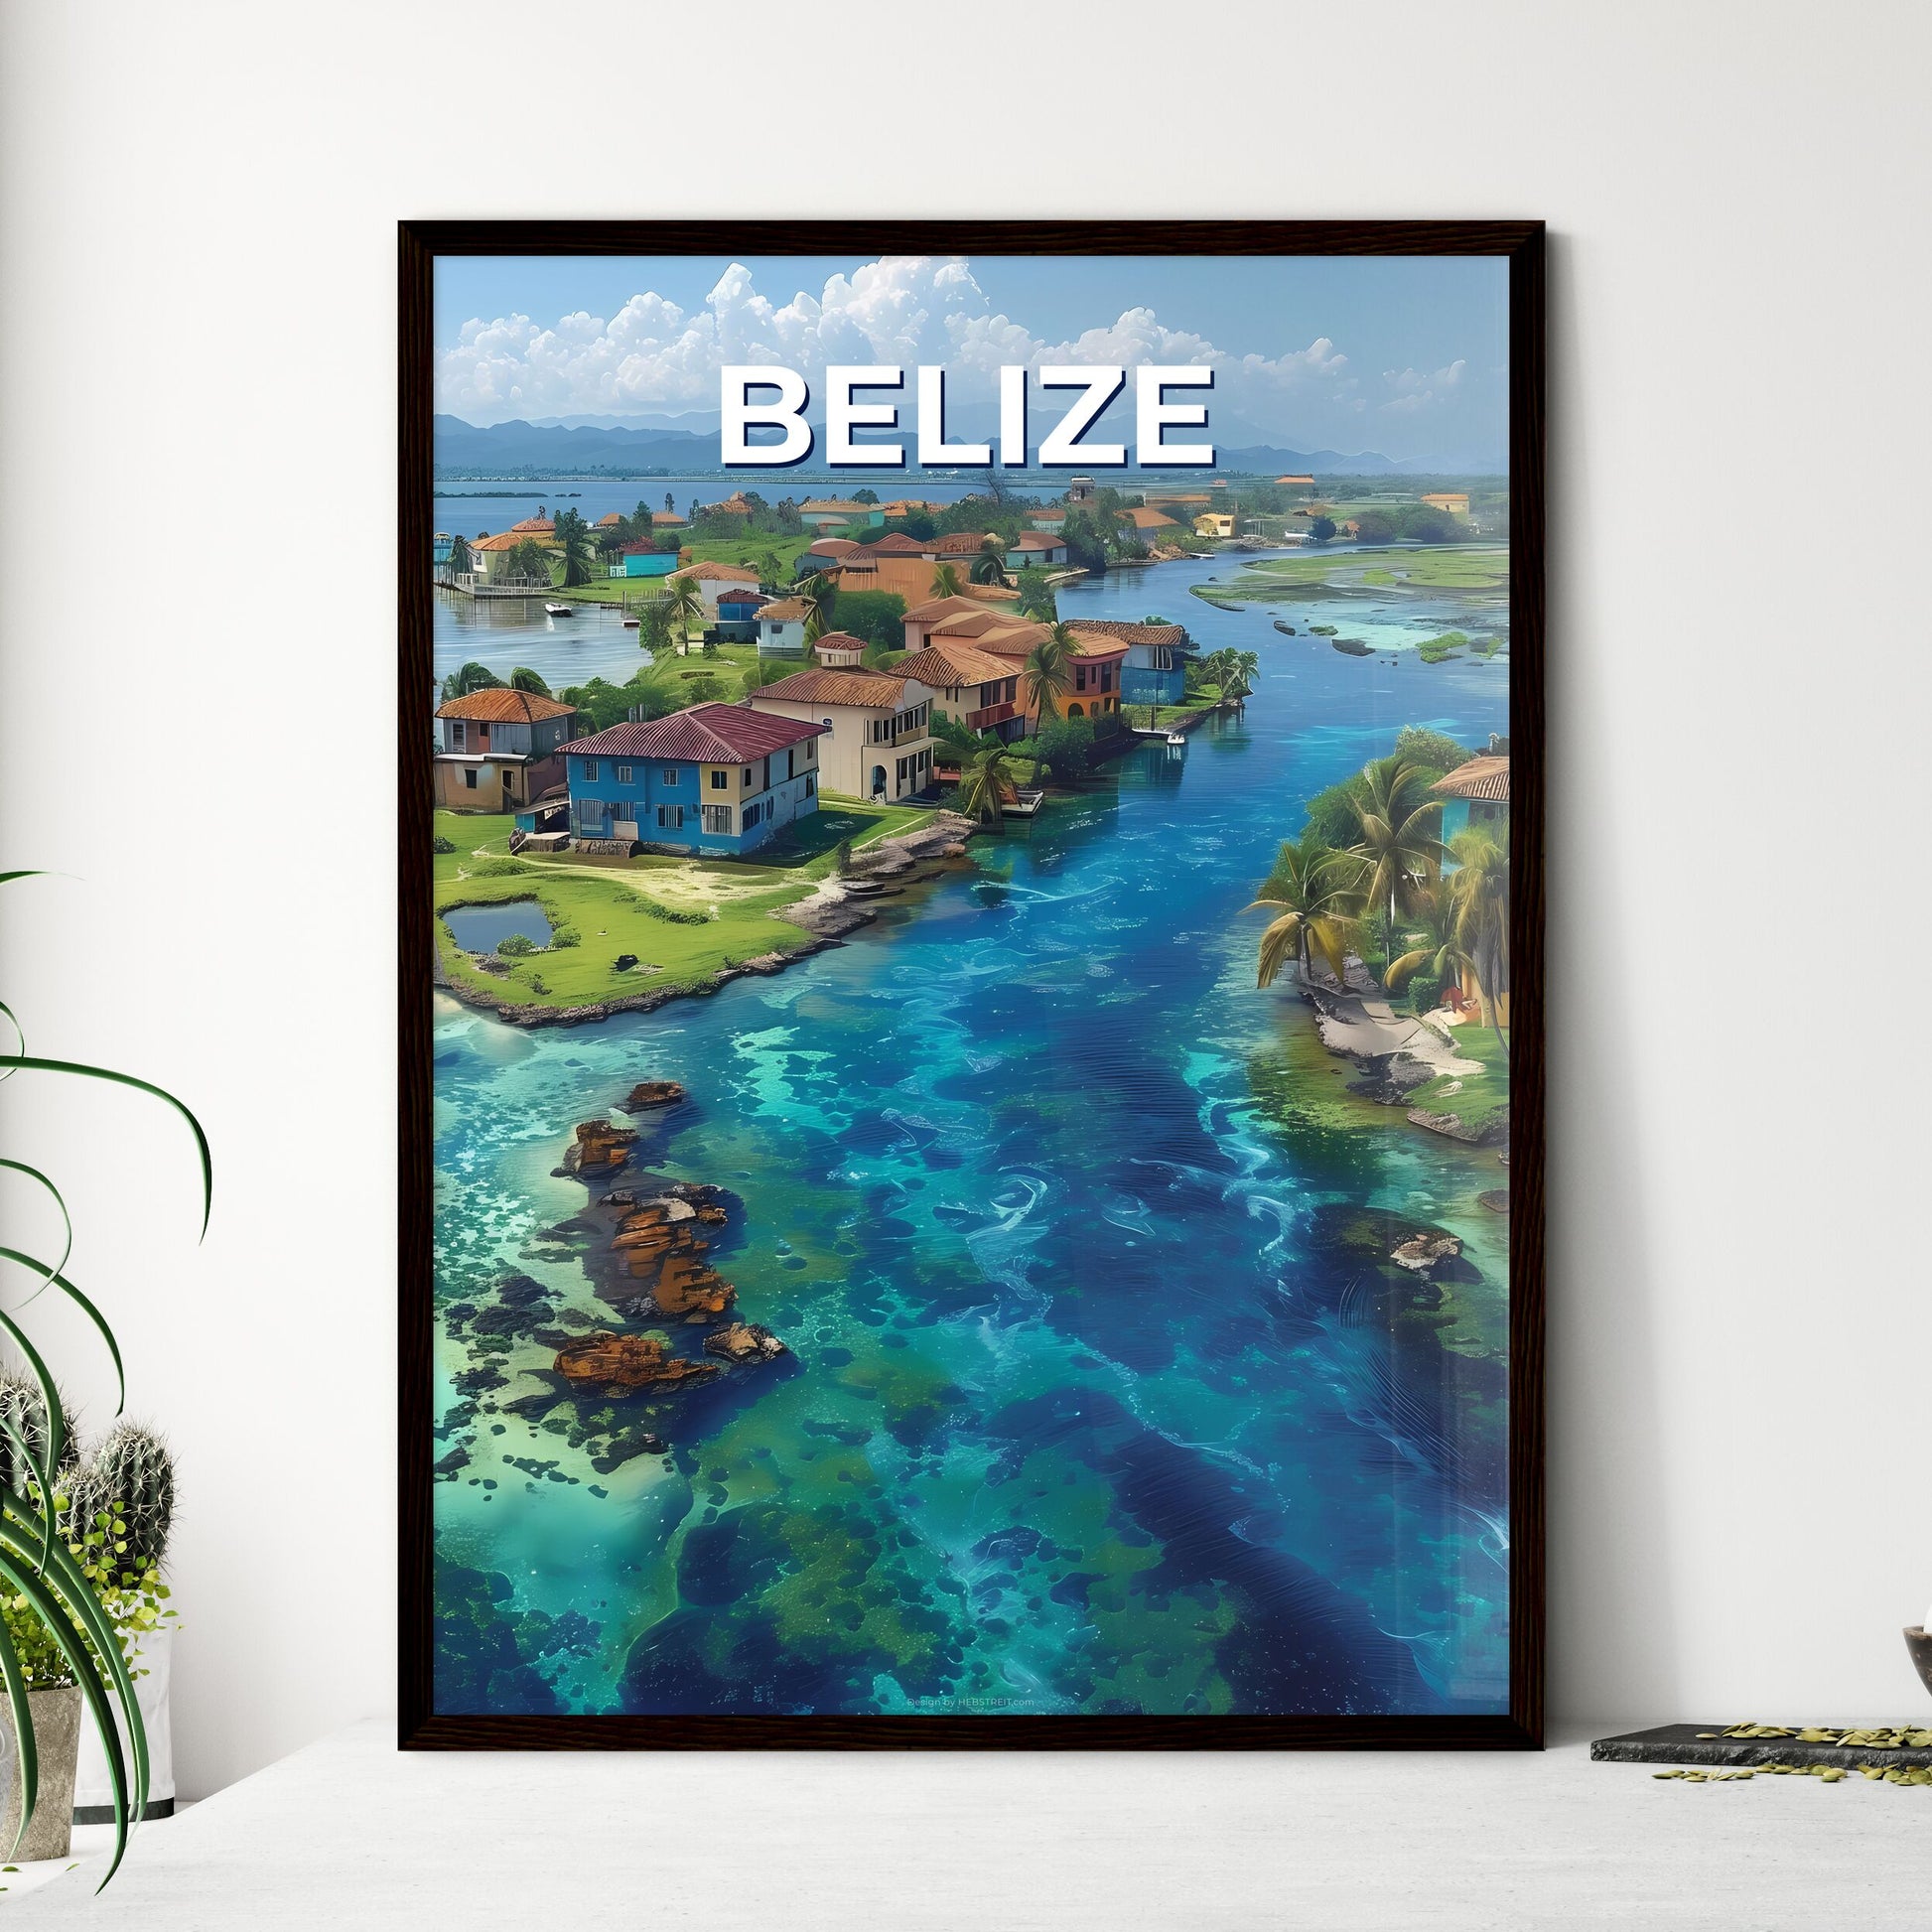 Vibrant Painting Artwork Depicting Houses, Trees, and Waterways in Belize